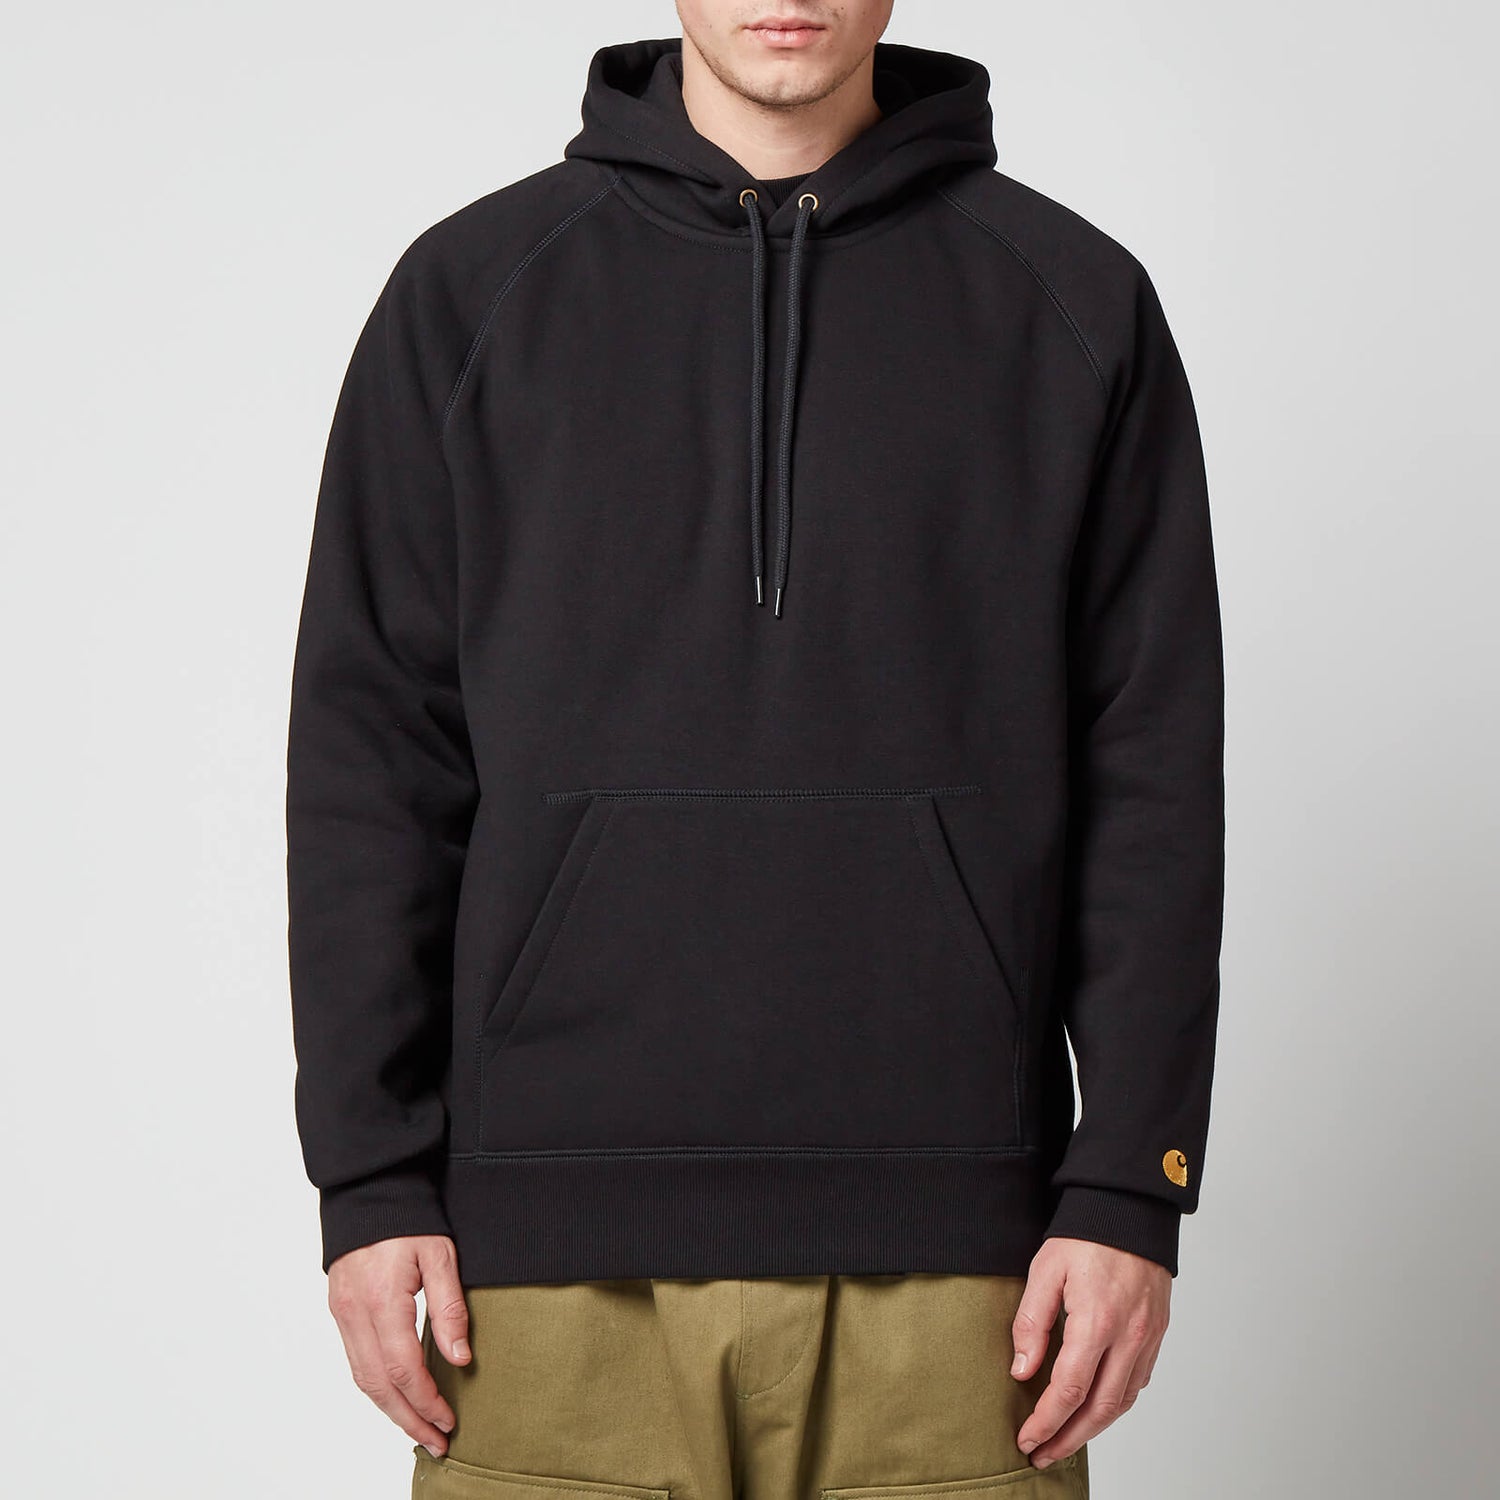 Carhartt WIP Men's Chase Pullover Hoodie - Black/Gold